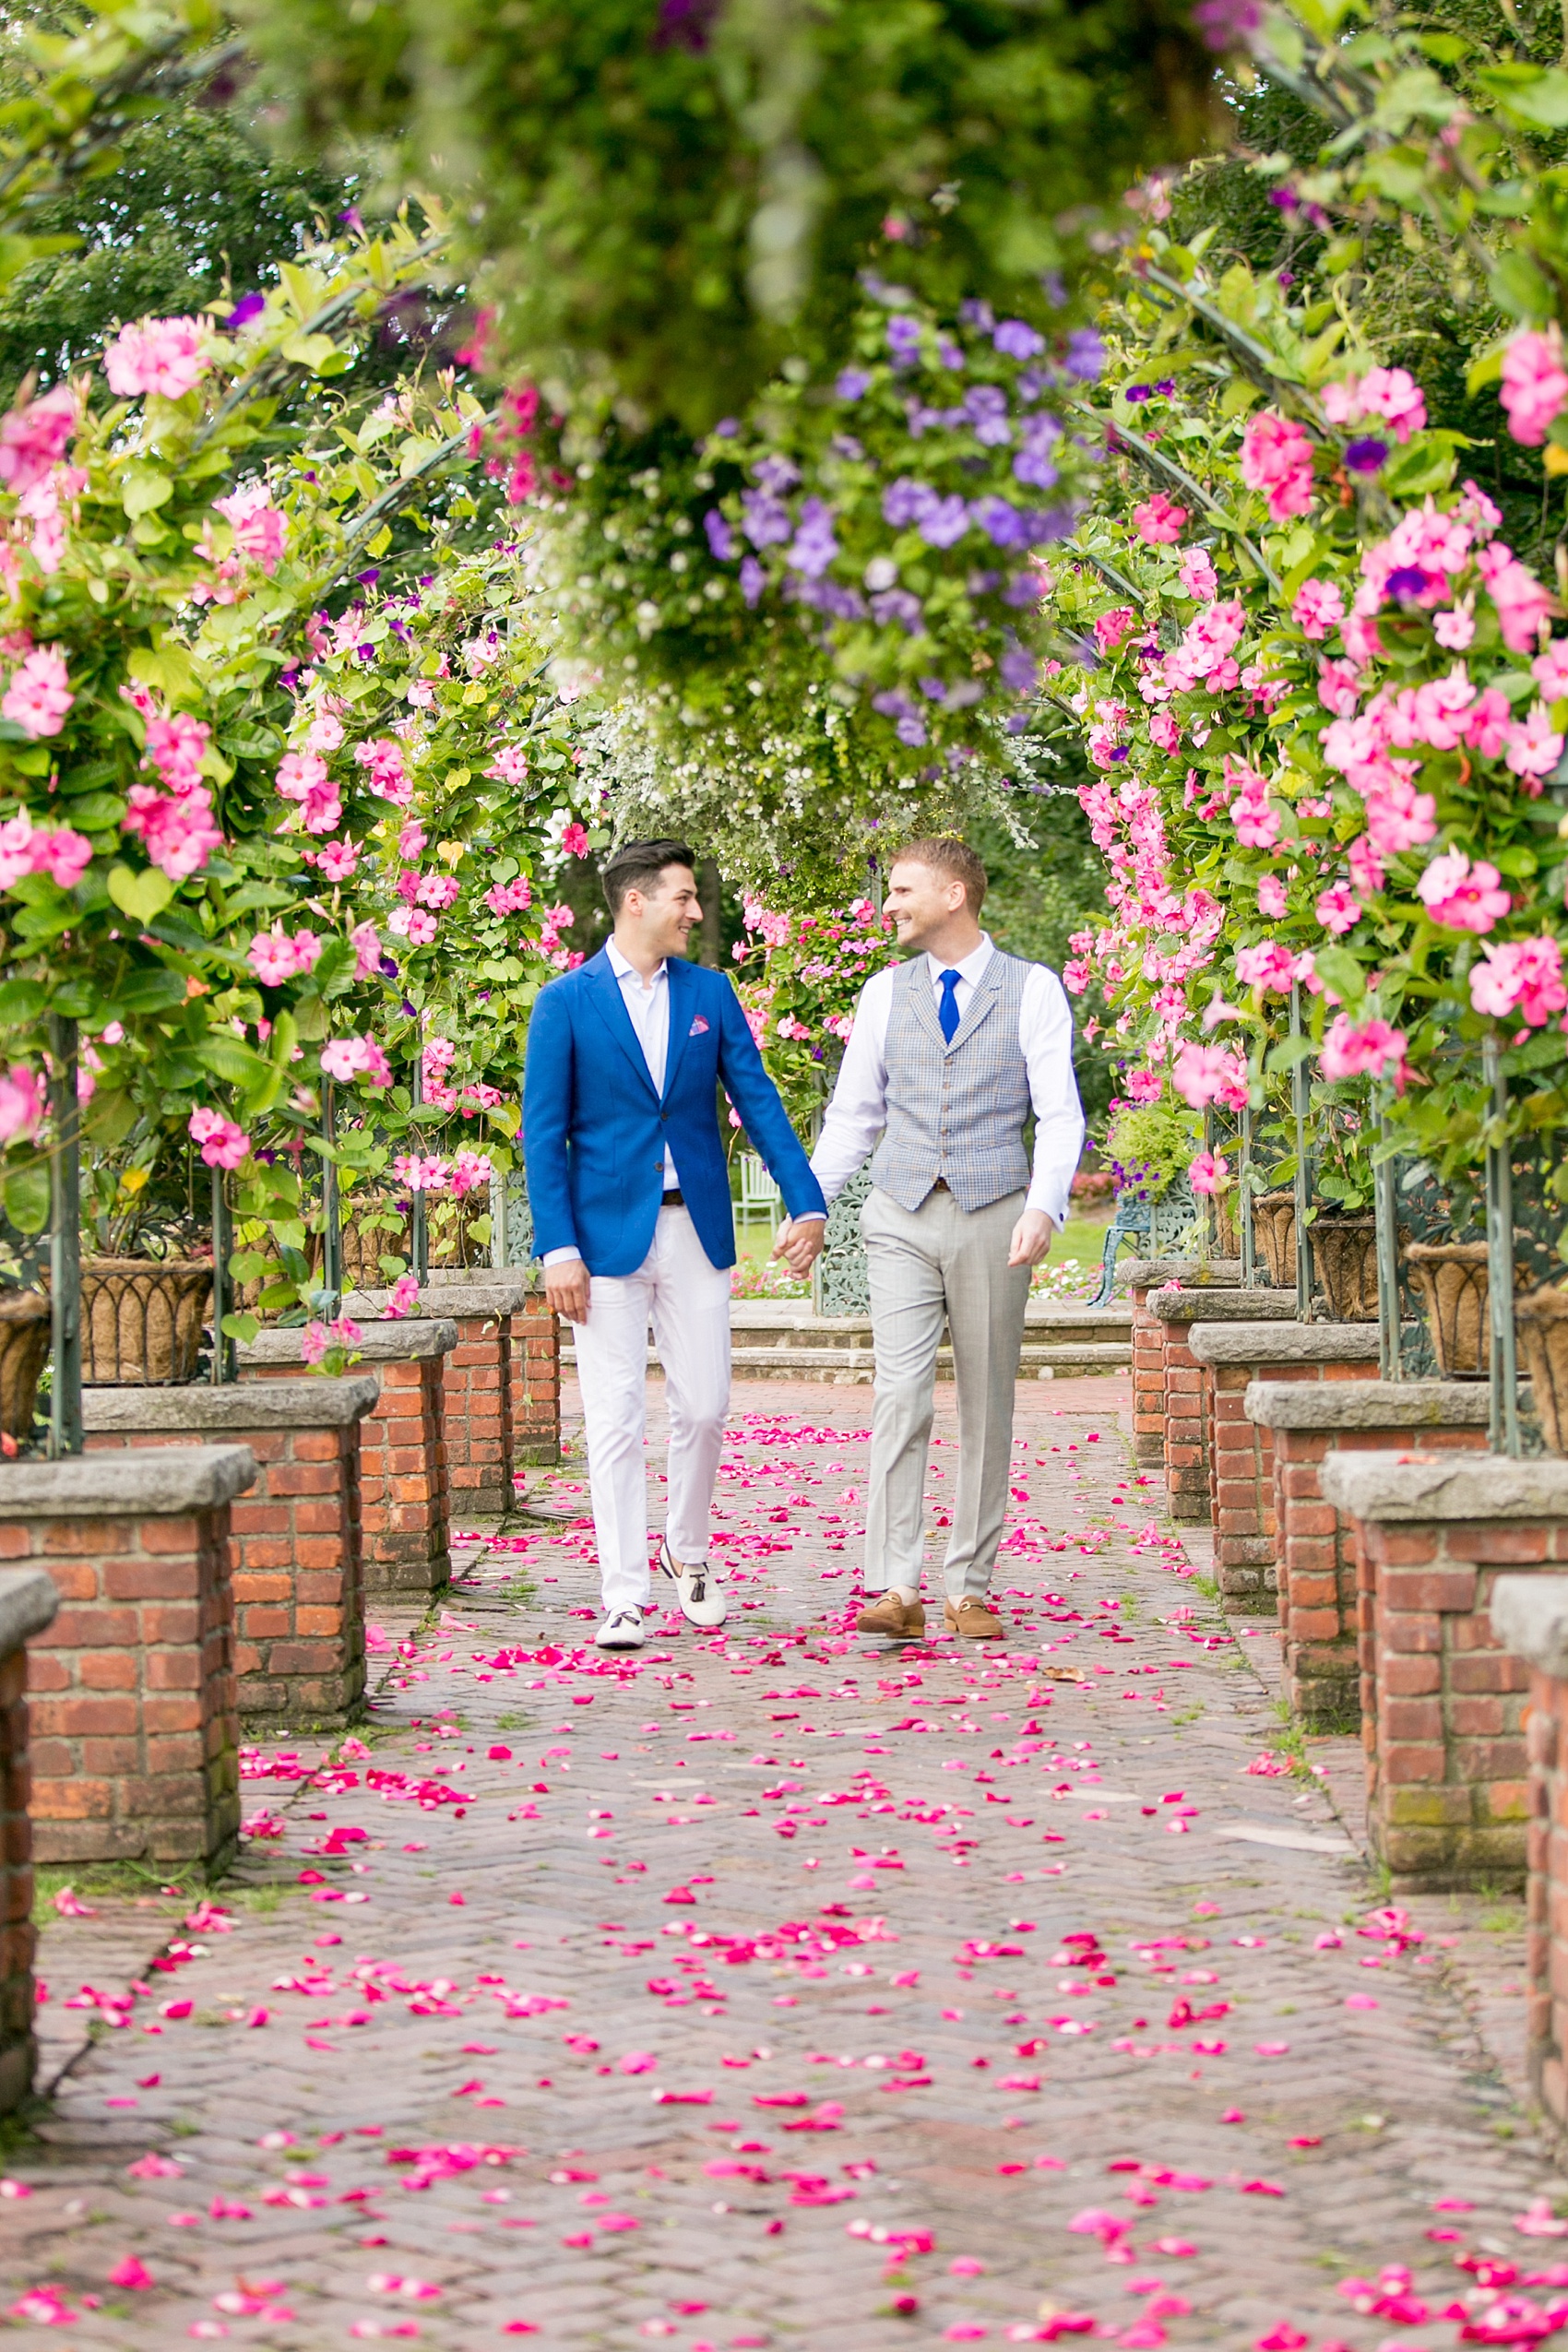 Mikkel Paige Photography photos of a gay wedding at The Manor in West Orange, NJ. The grooms walk to their outdoor summer ceremony on a rose petal carpet under live arches and greenery.